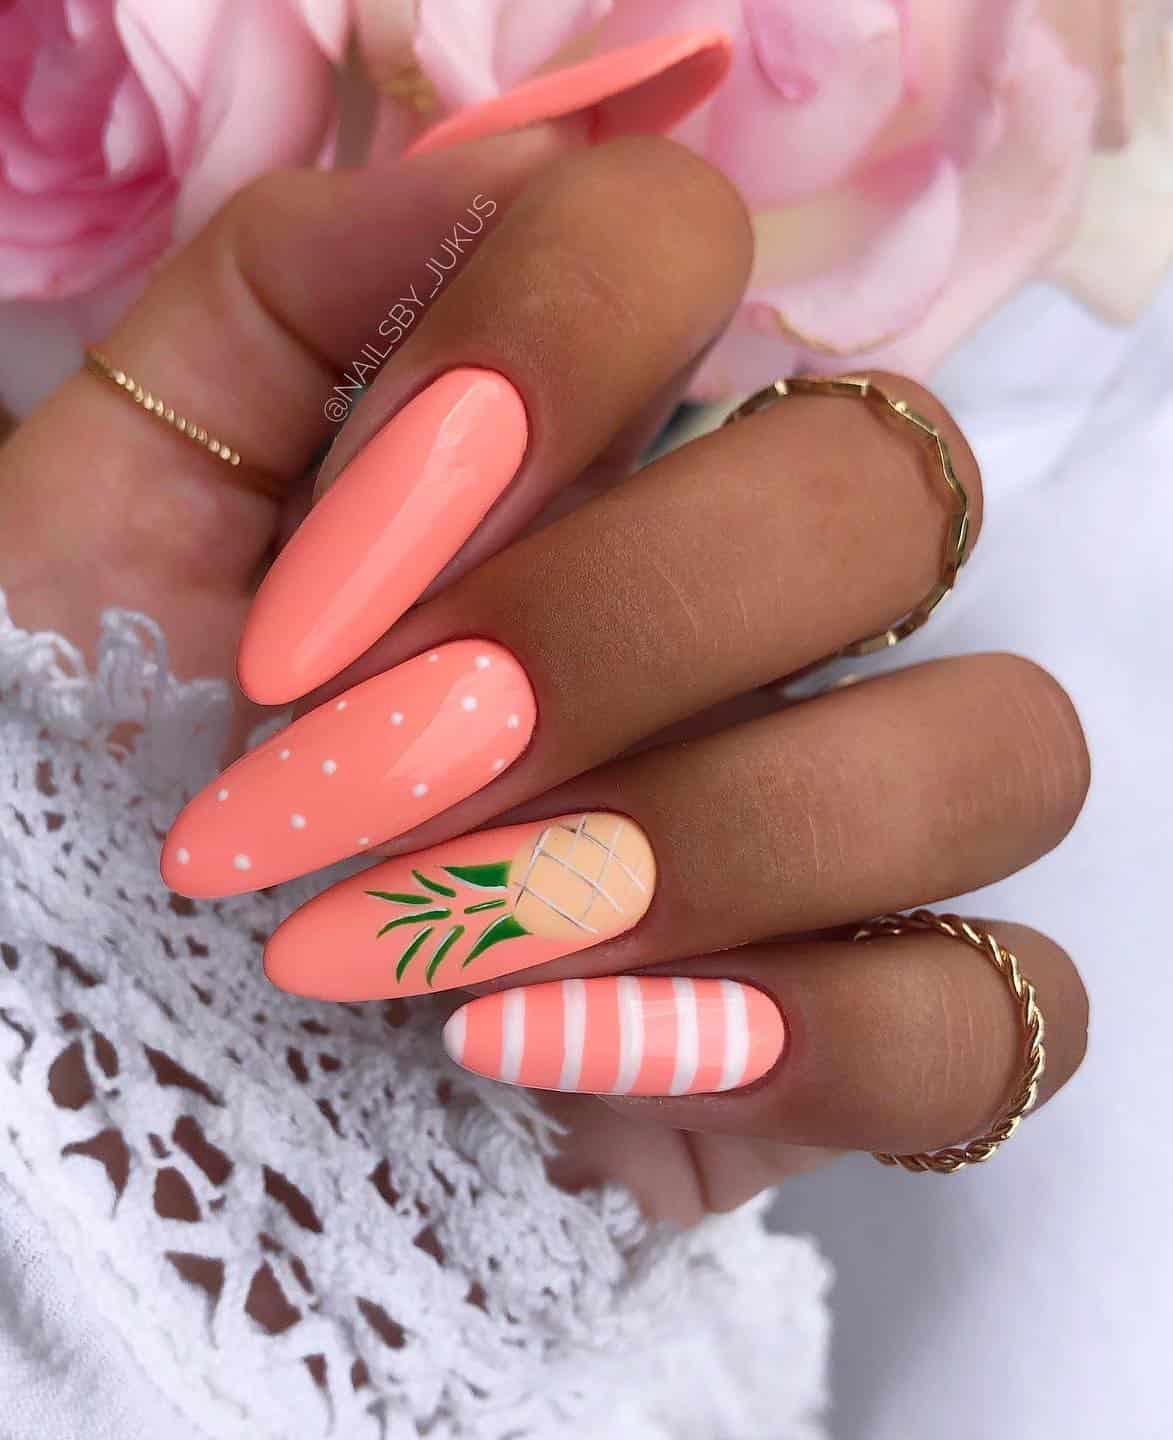 A hand with long coral peach, almond nails featuring different designs such as white polka dots, white stripes, and pineapple nail art